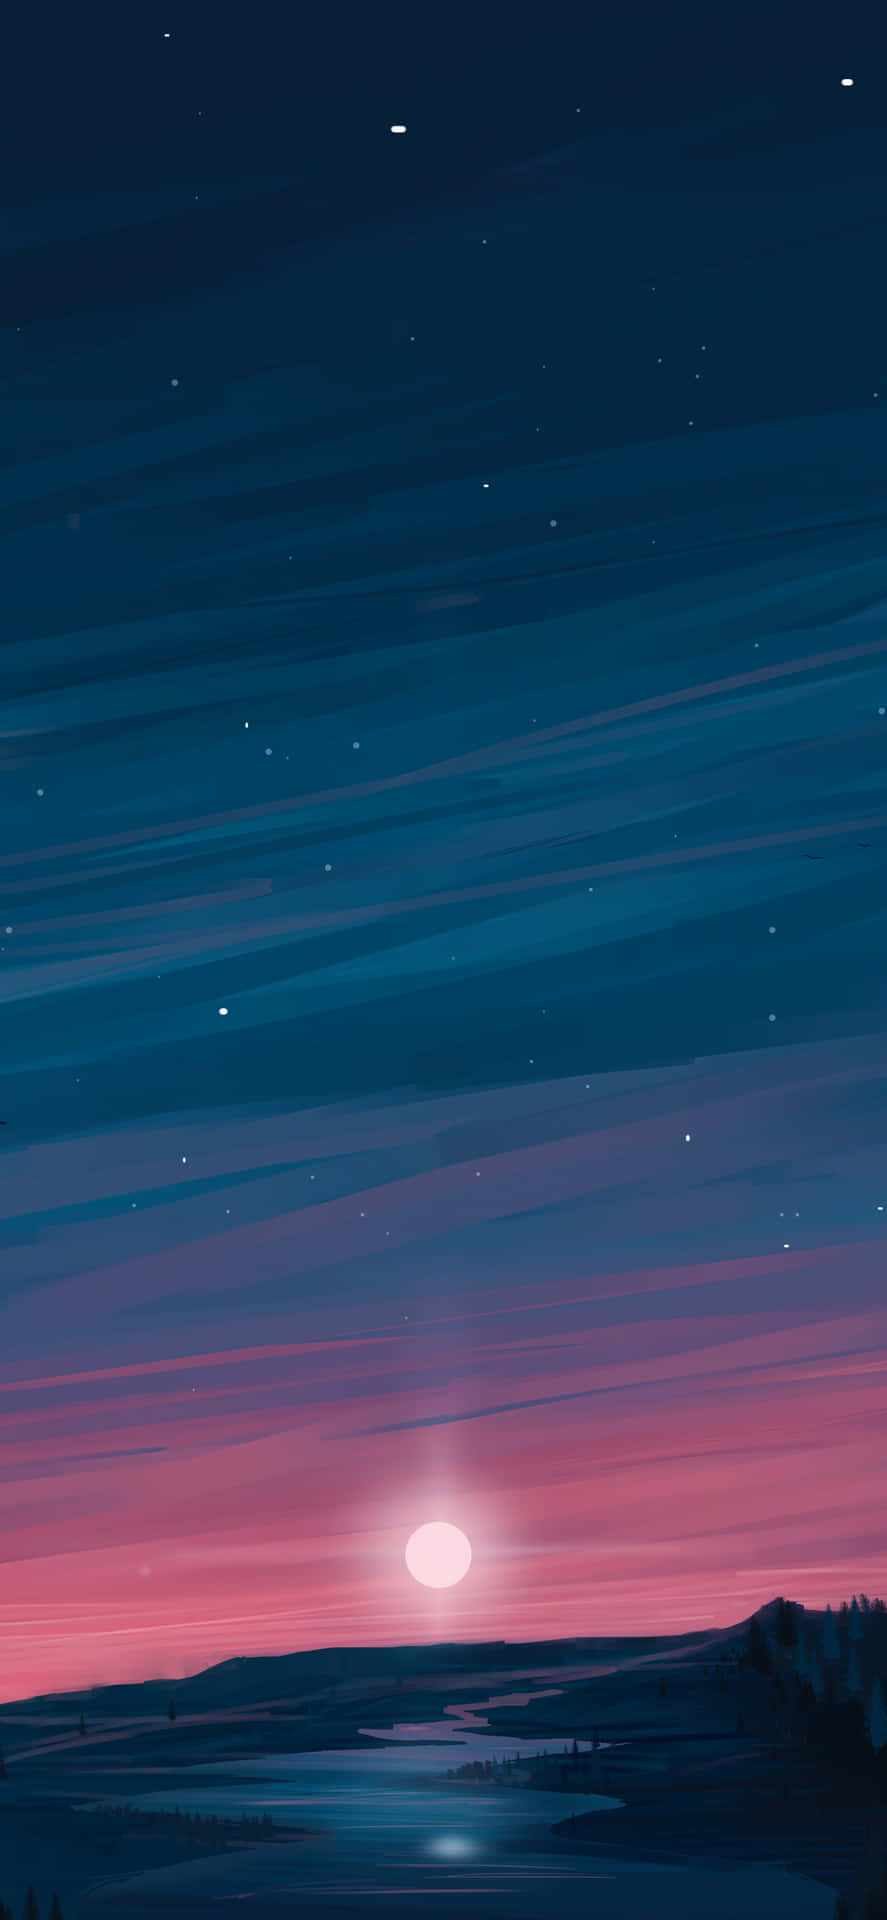 A Painting Of A Night Sky With Stars Wallpaper